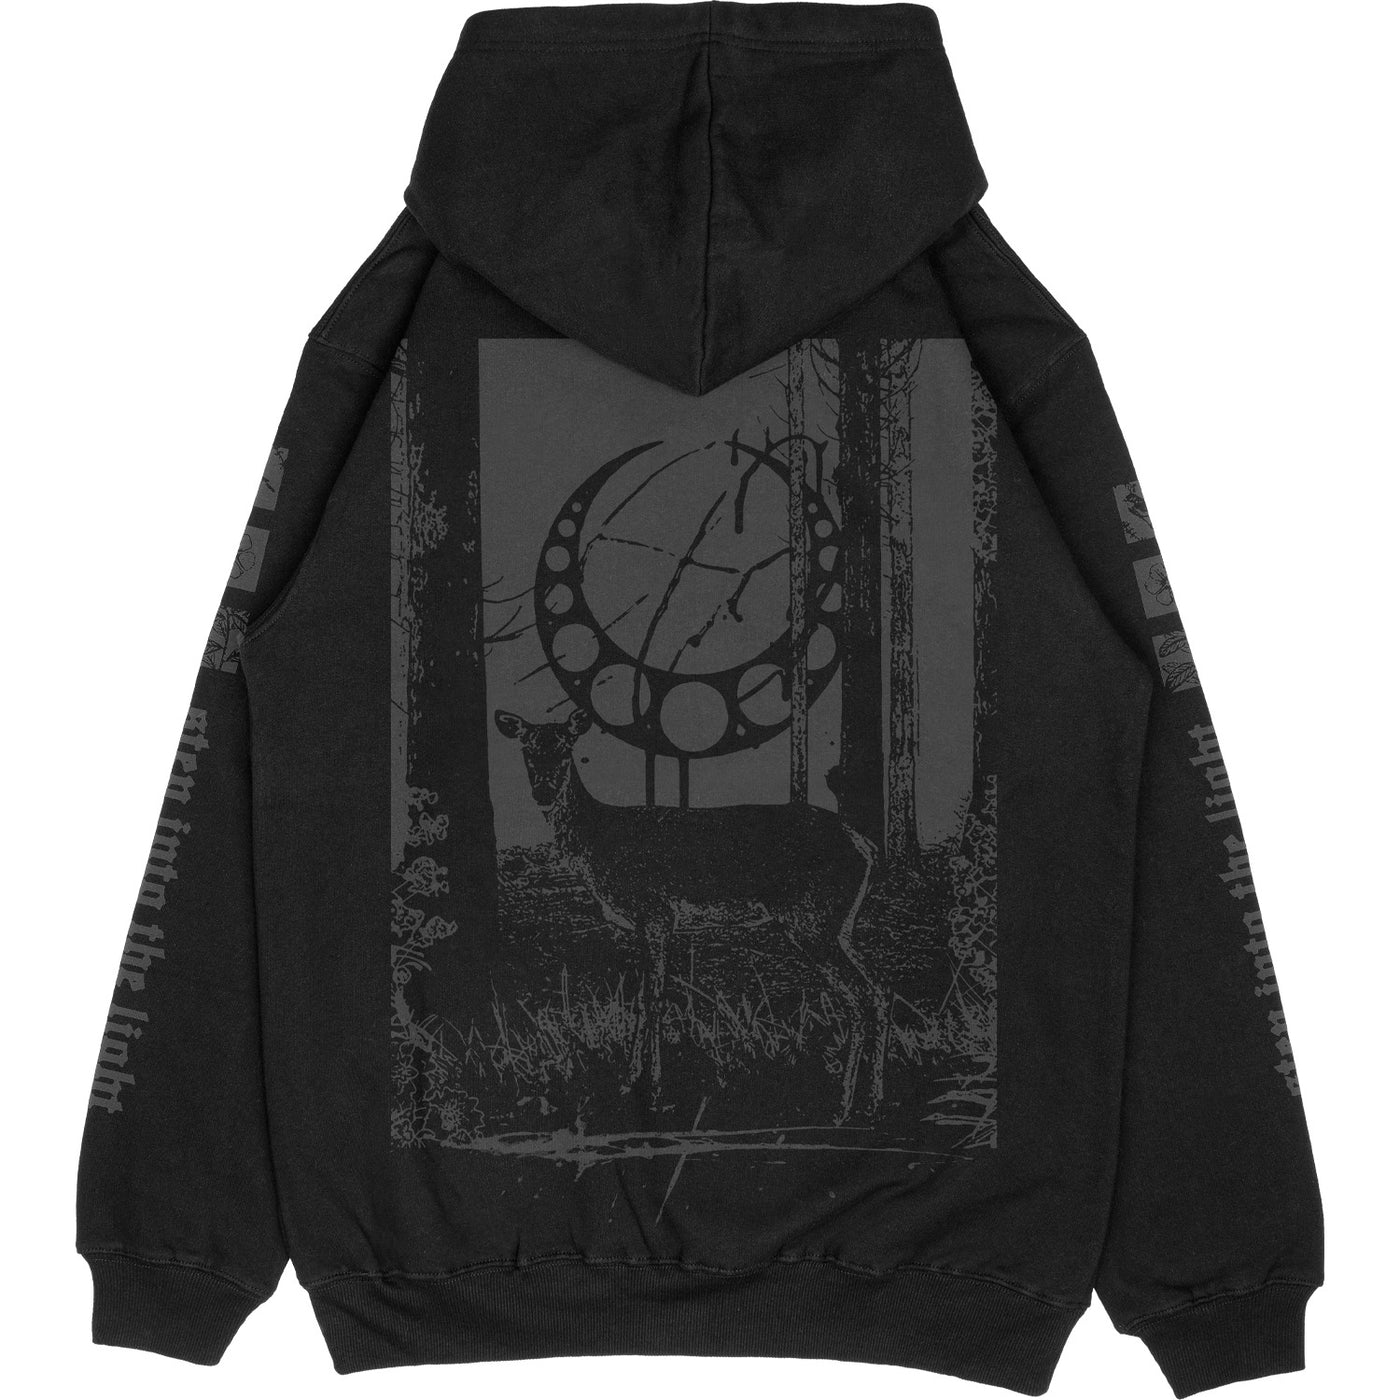 back of The Acacia Strain Deer Black Pullover. full back print of forest scene with a Deer looking at you with the Acacia Strain half circle symbol behind it in grey ink. 